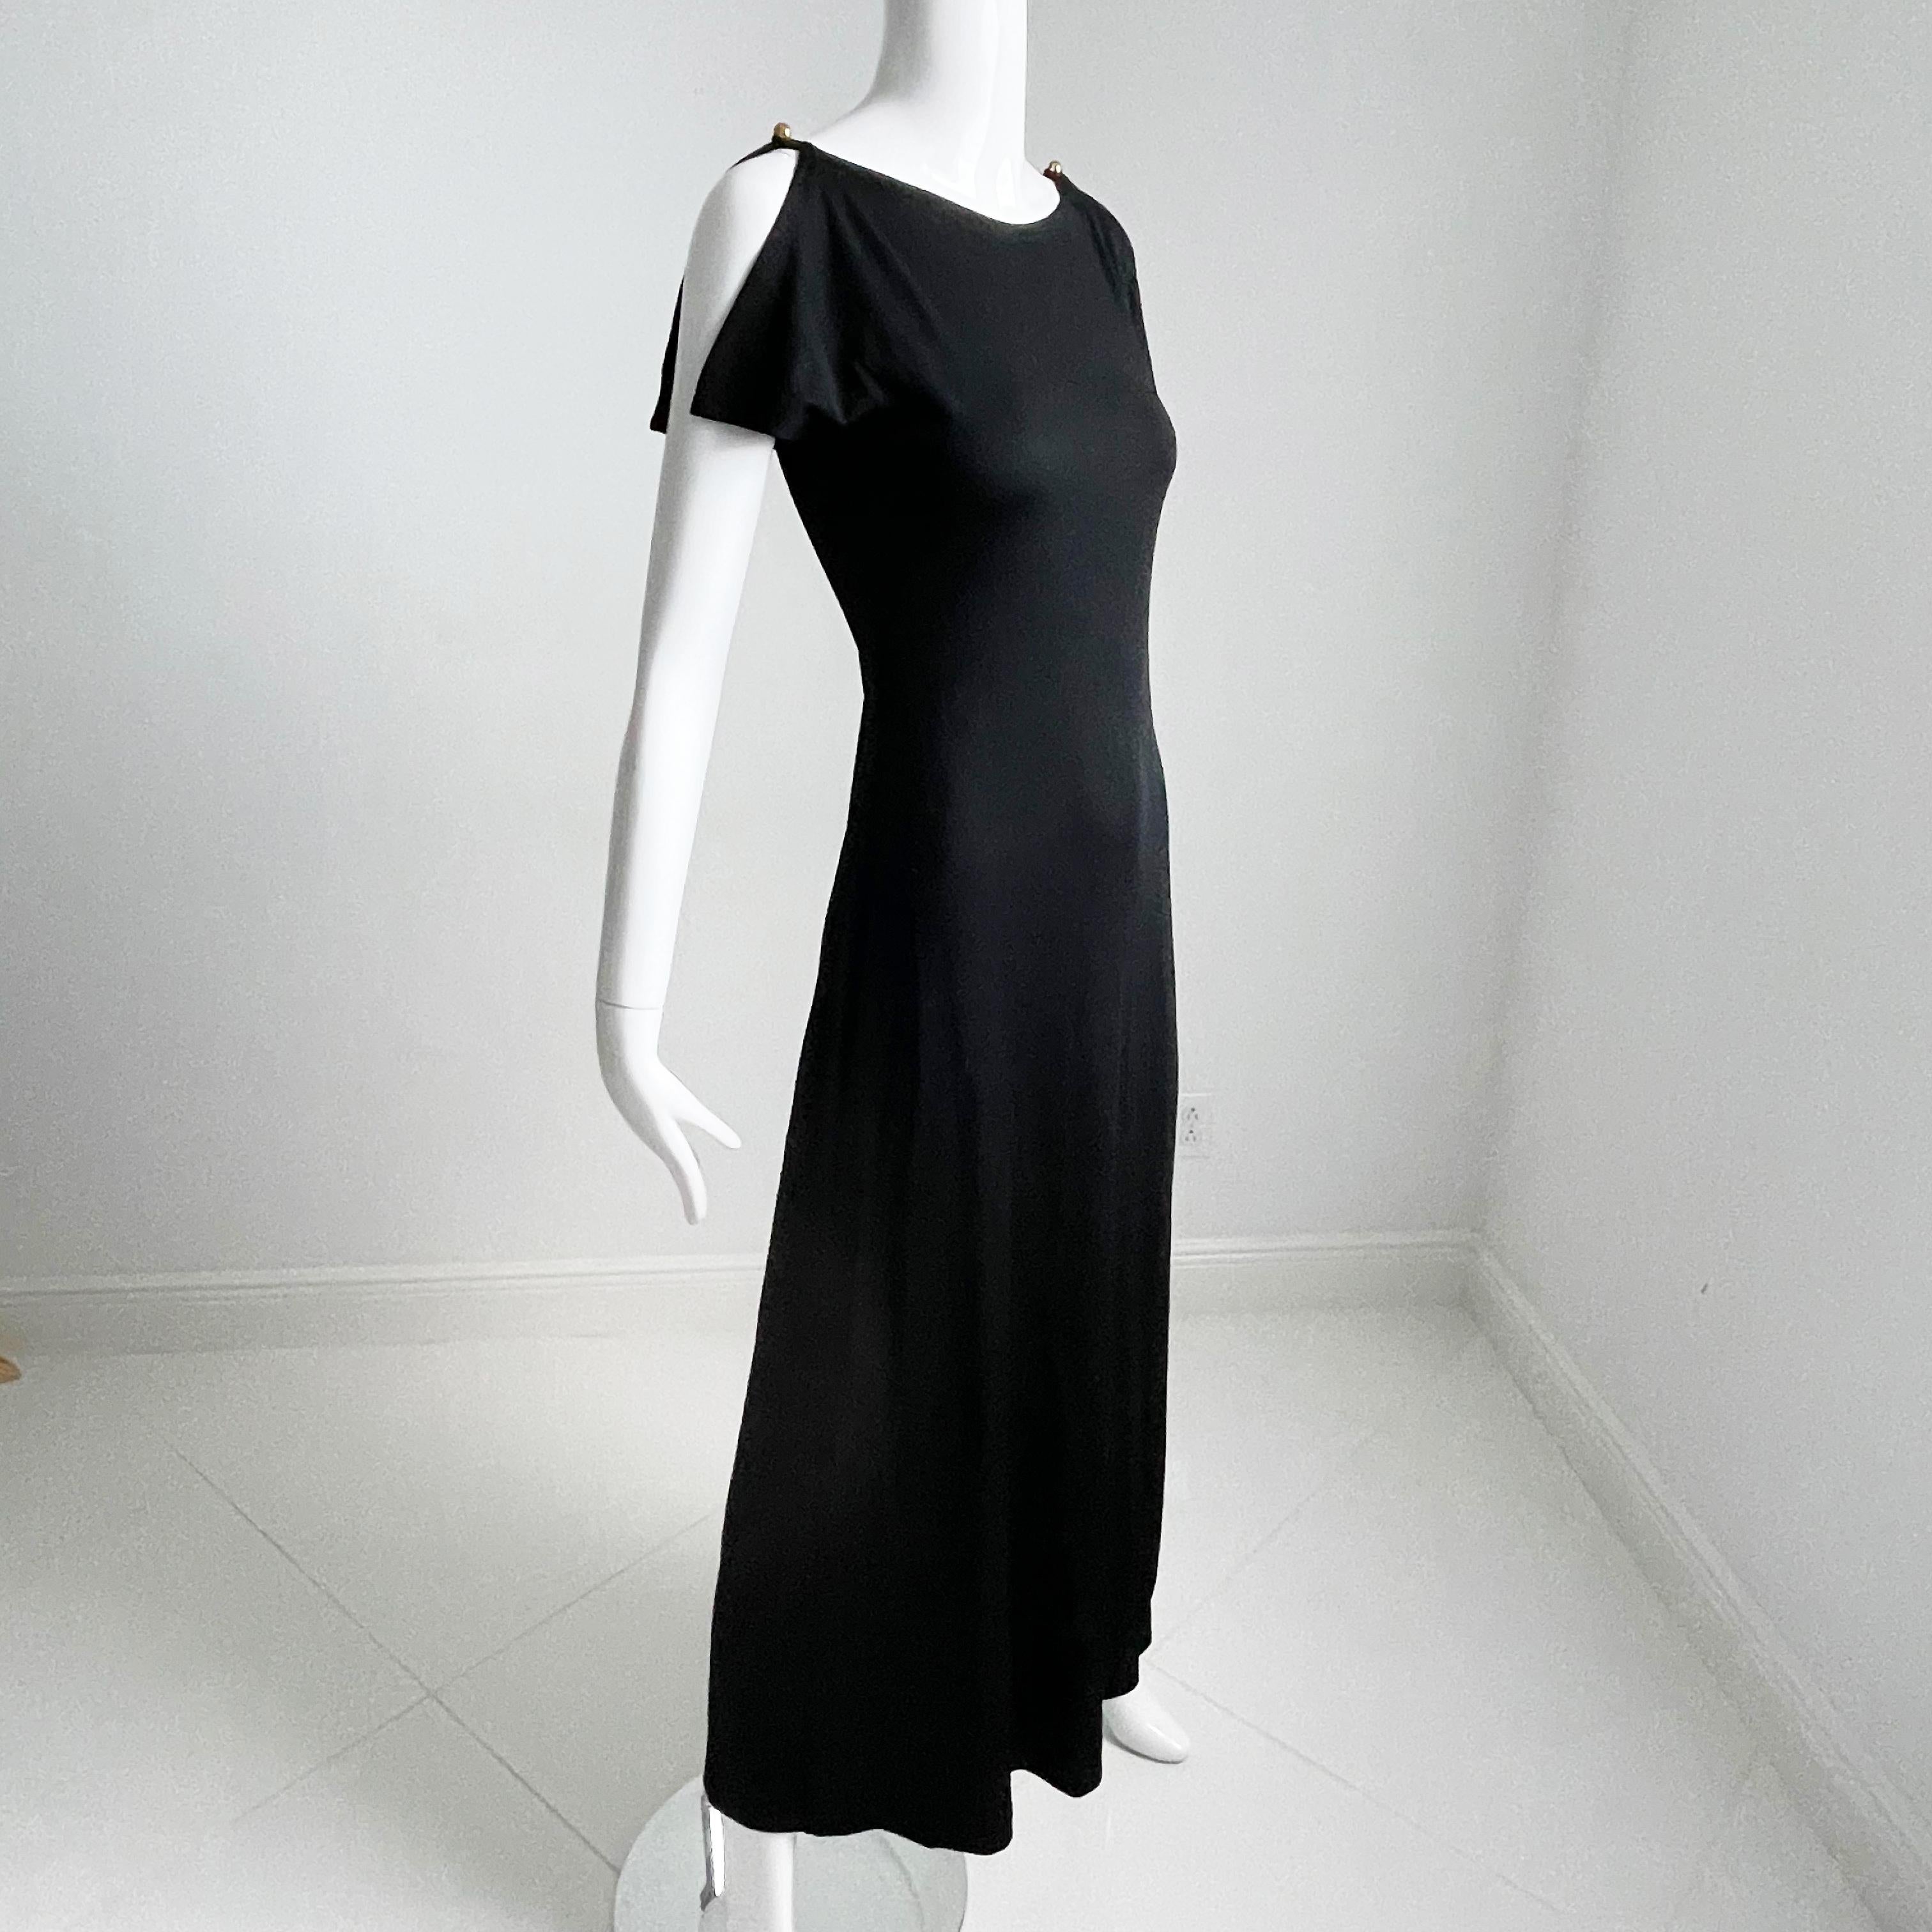 Clovis Ruffin Maxi Dress Black Jersey Flutter Sleeves Saks 5th Ave 1970s  For Sale 3